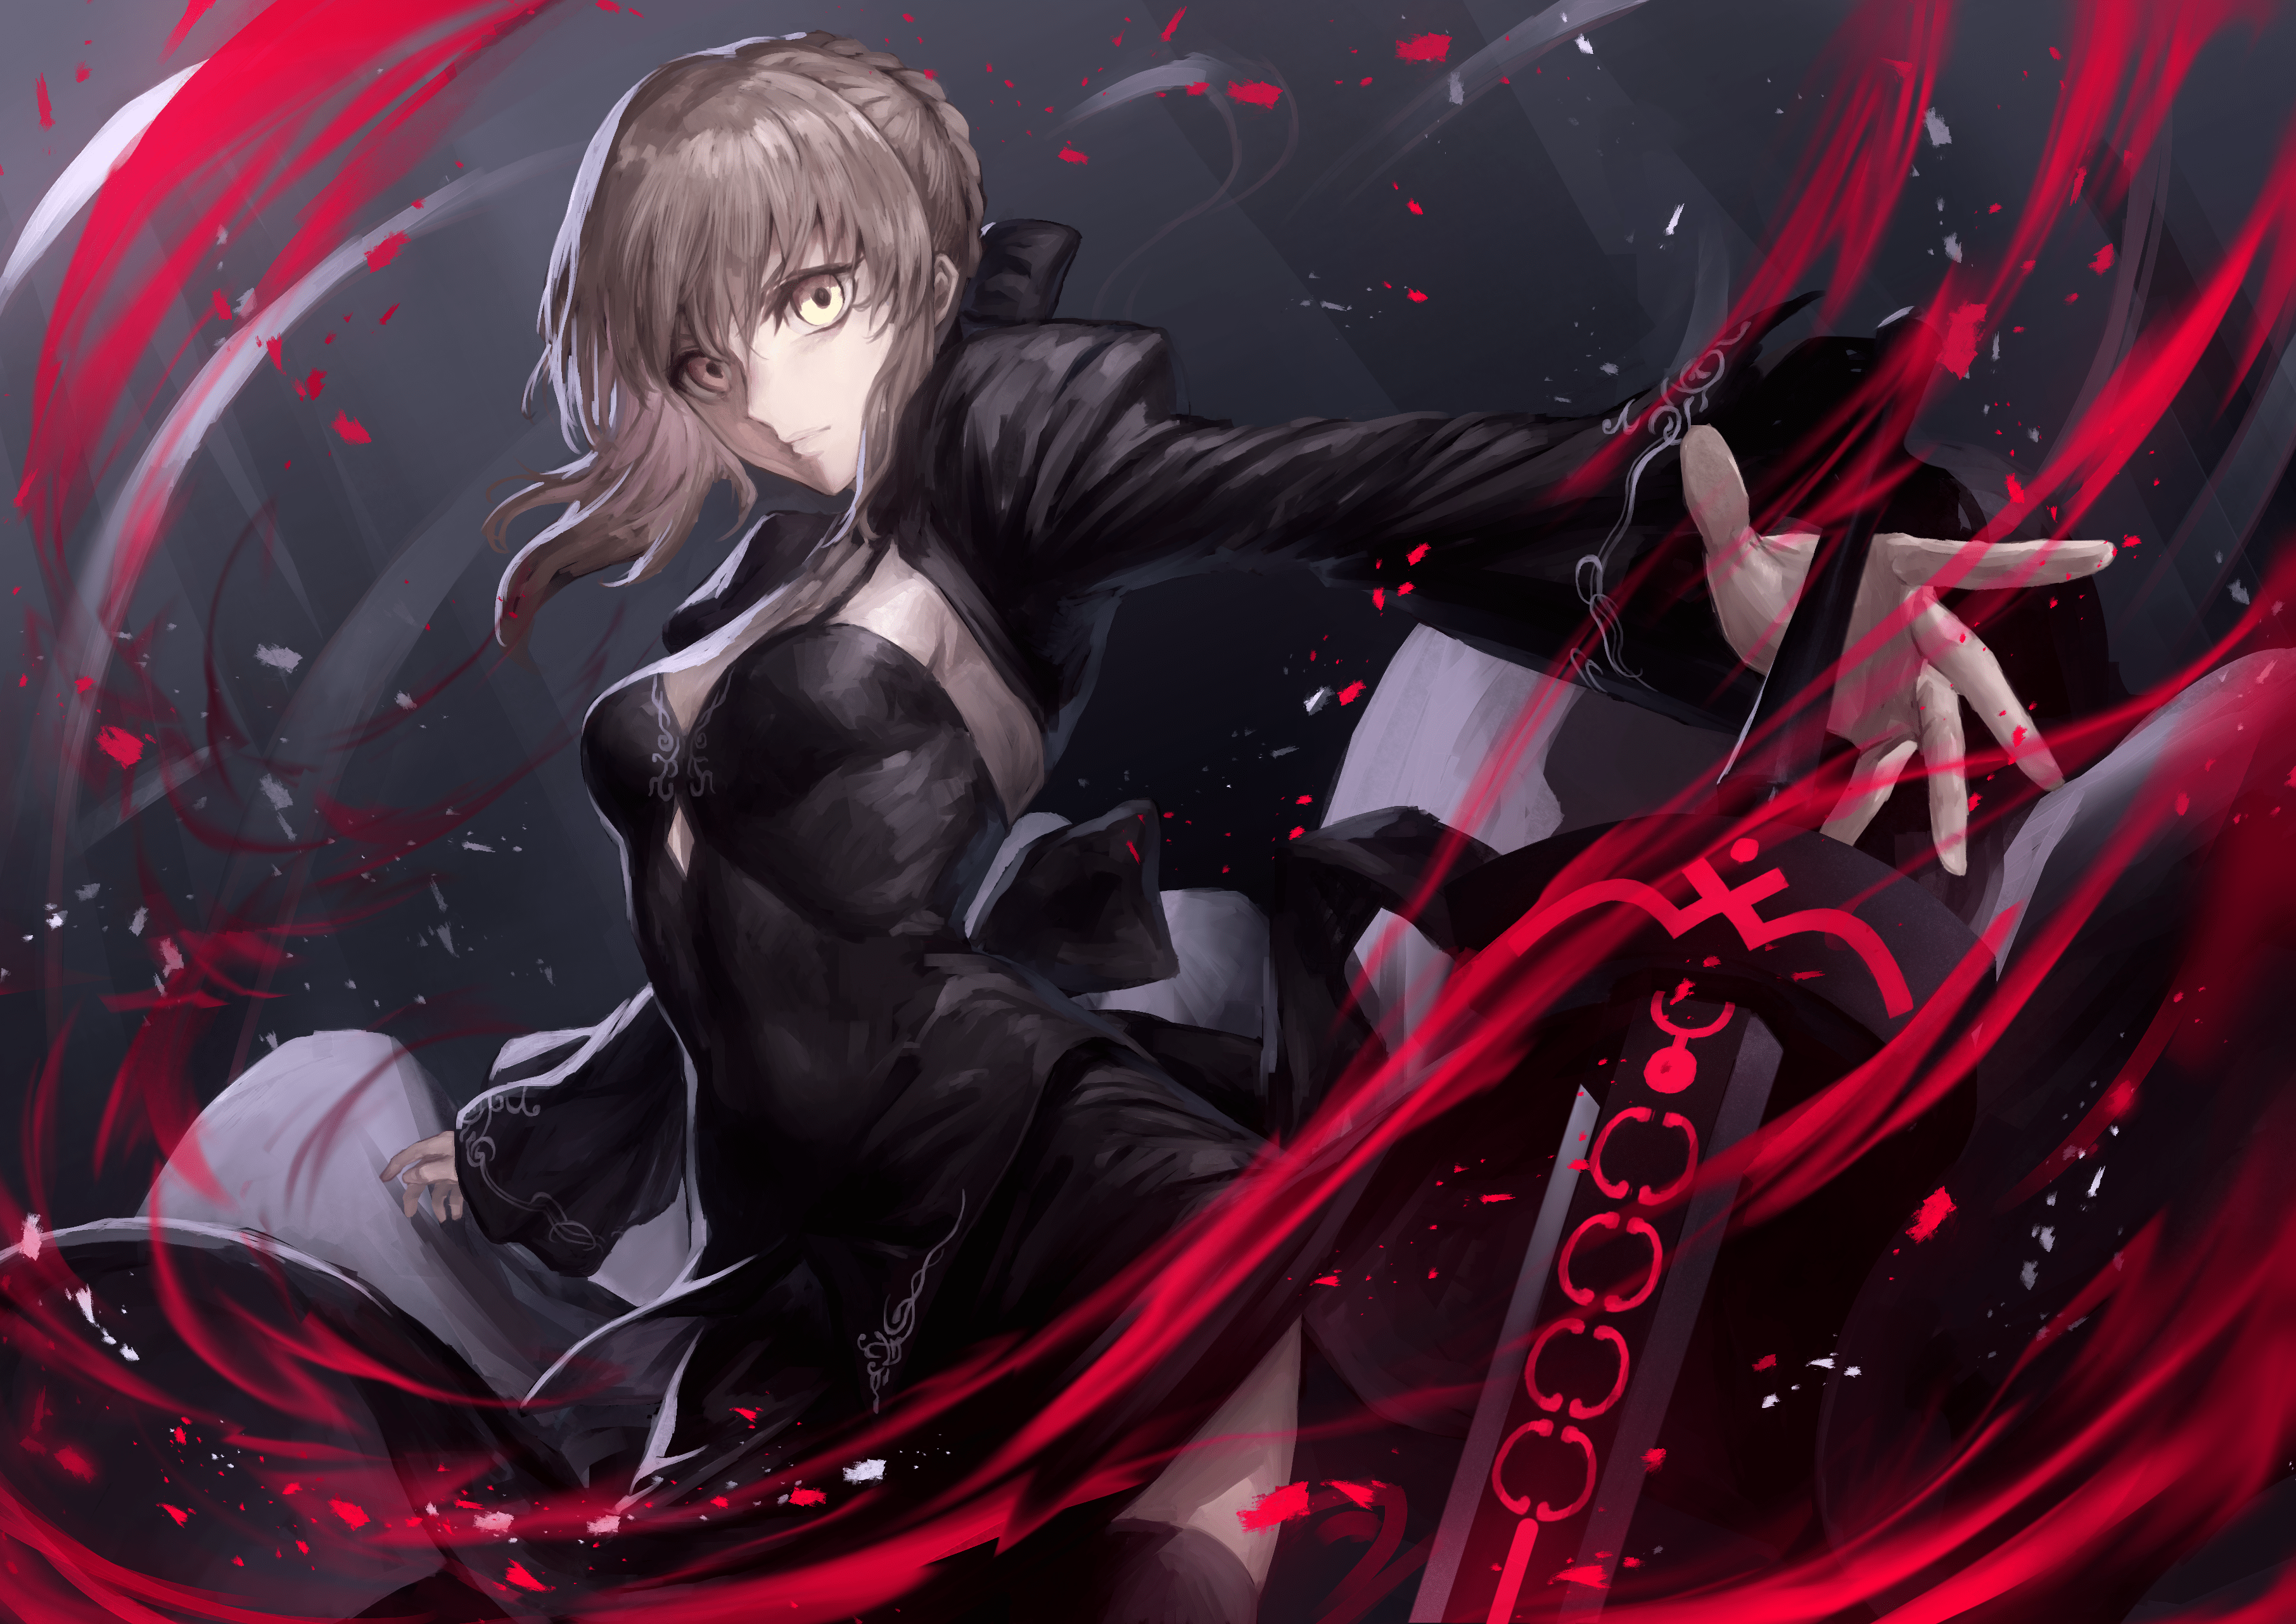 Saber Alter Wallpapers Top Free Saber Alter Backgrounds Wallpaperaccess